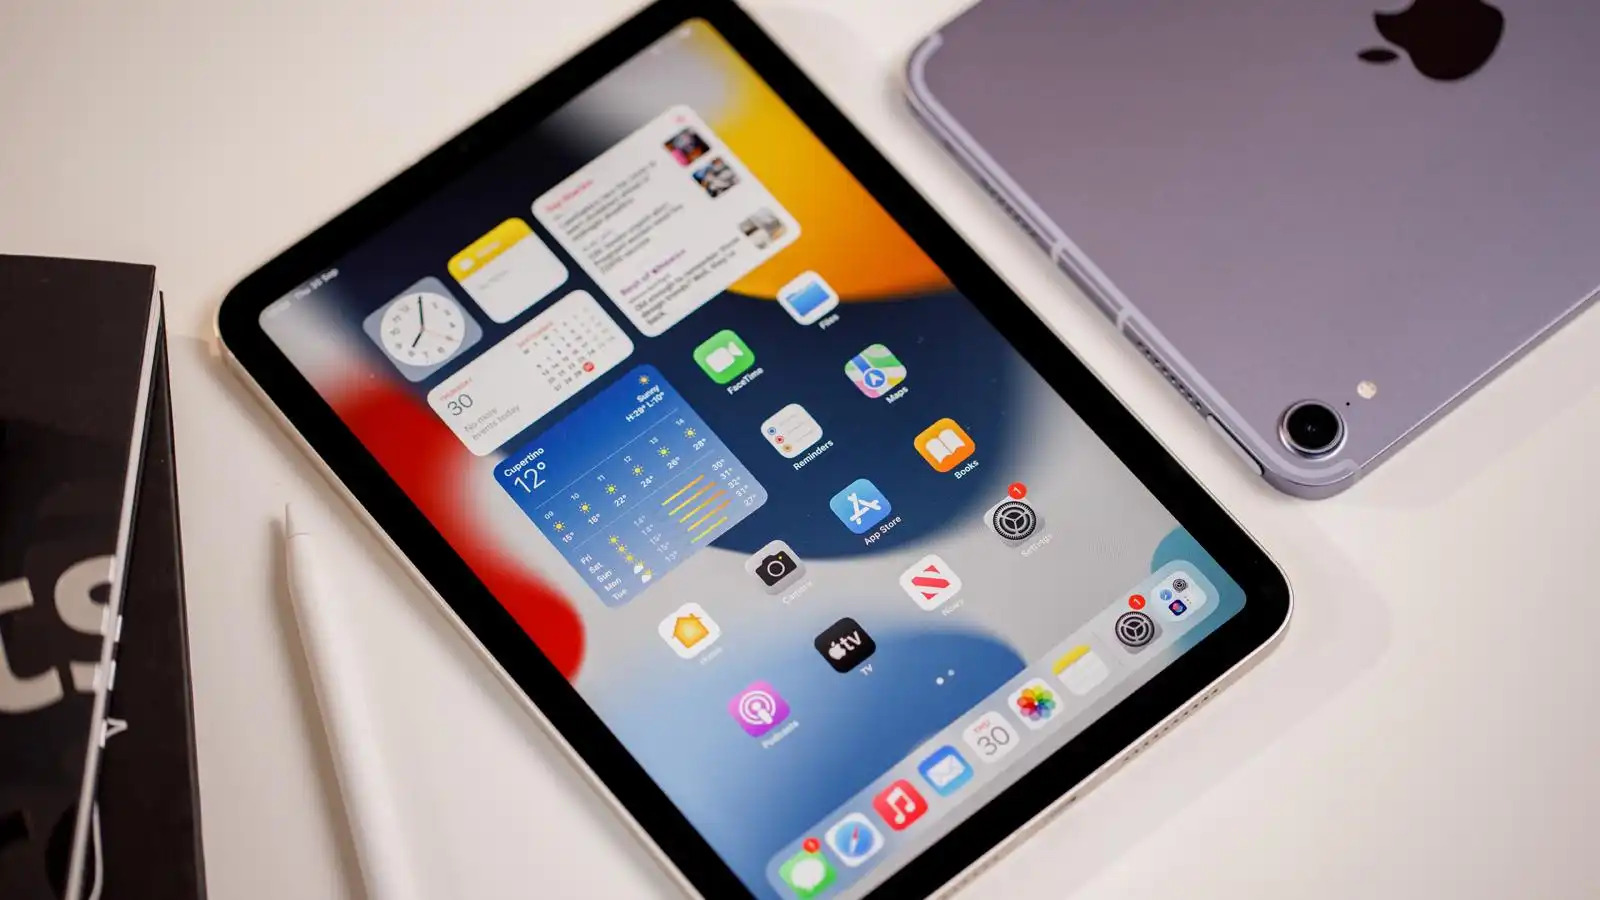 the-next-ipad-mini-might-be-more-powerful-but-thats-not-what-it-needs